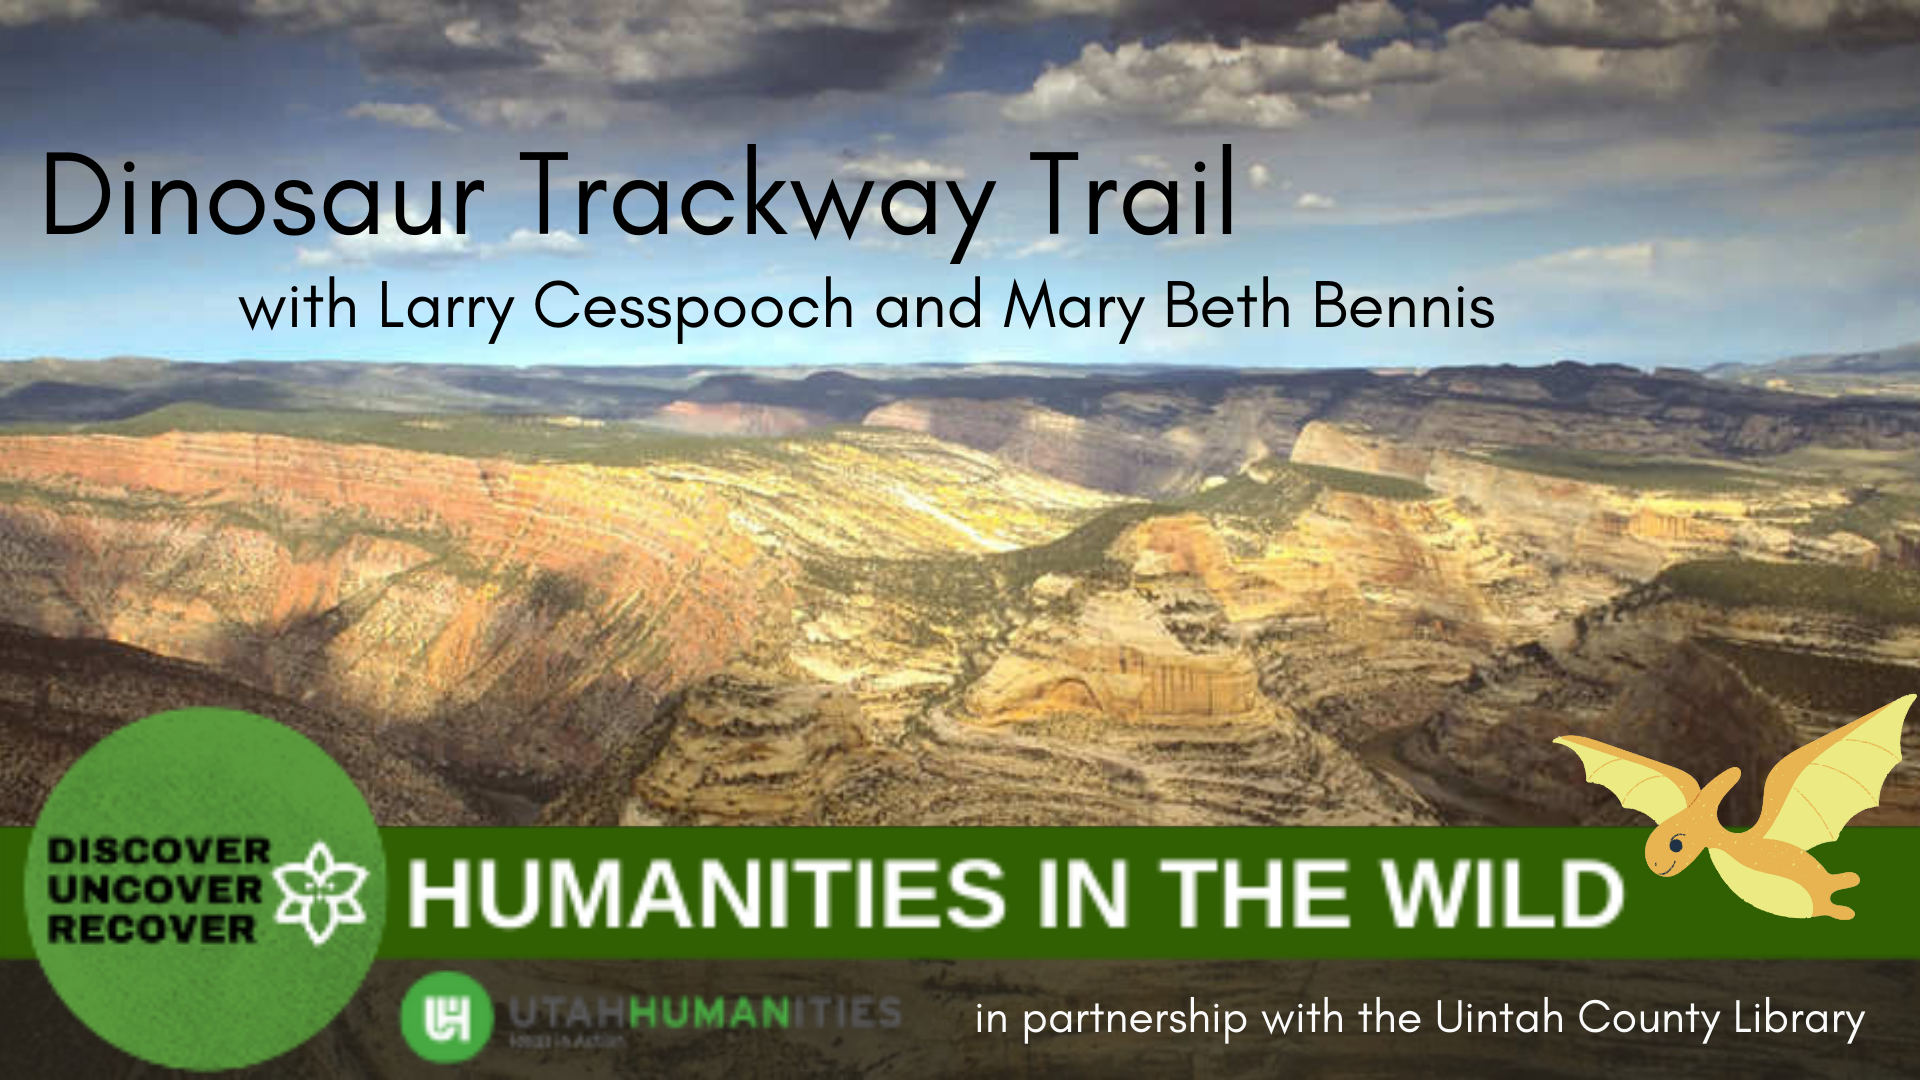 "Dinosaur Trackway Trail with Larry Cesspooch and Mary Beth Bennis"